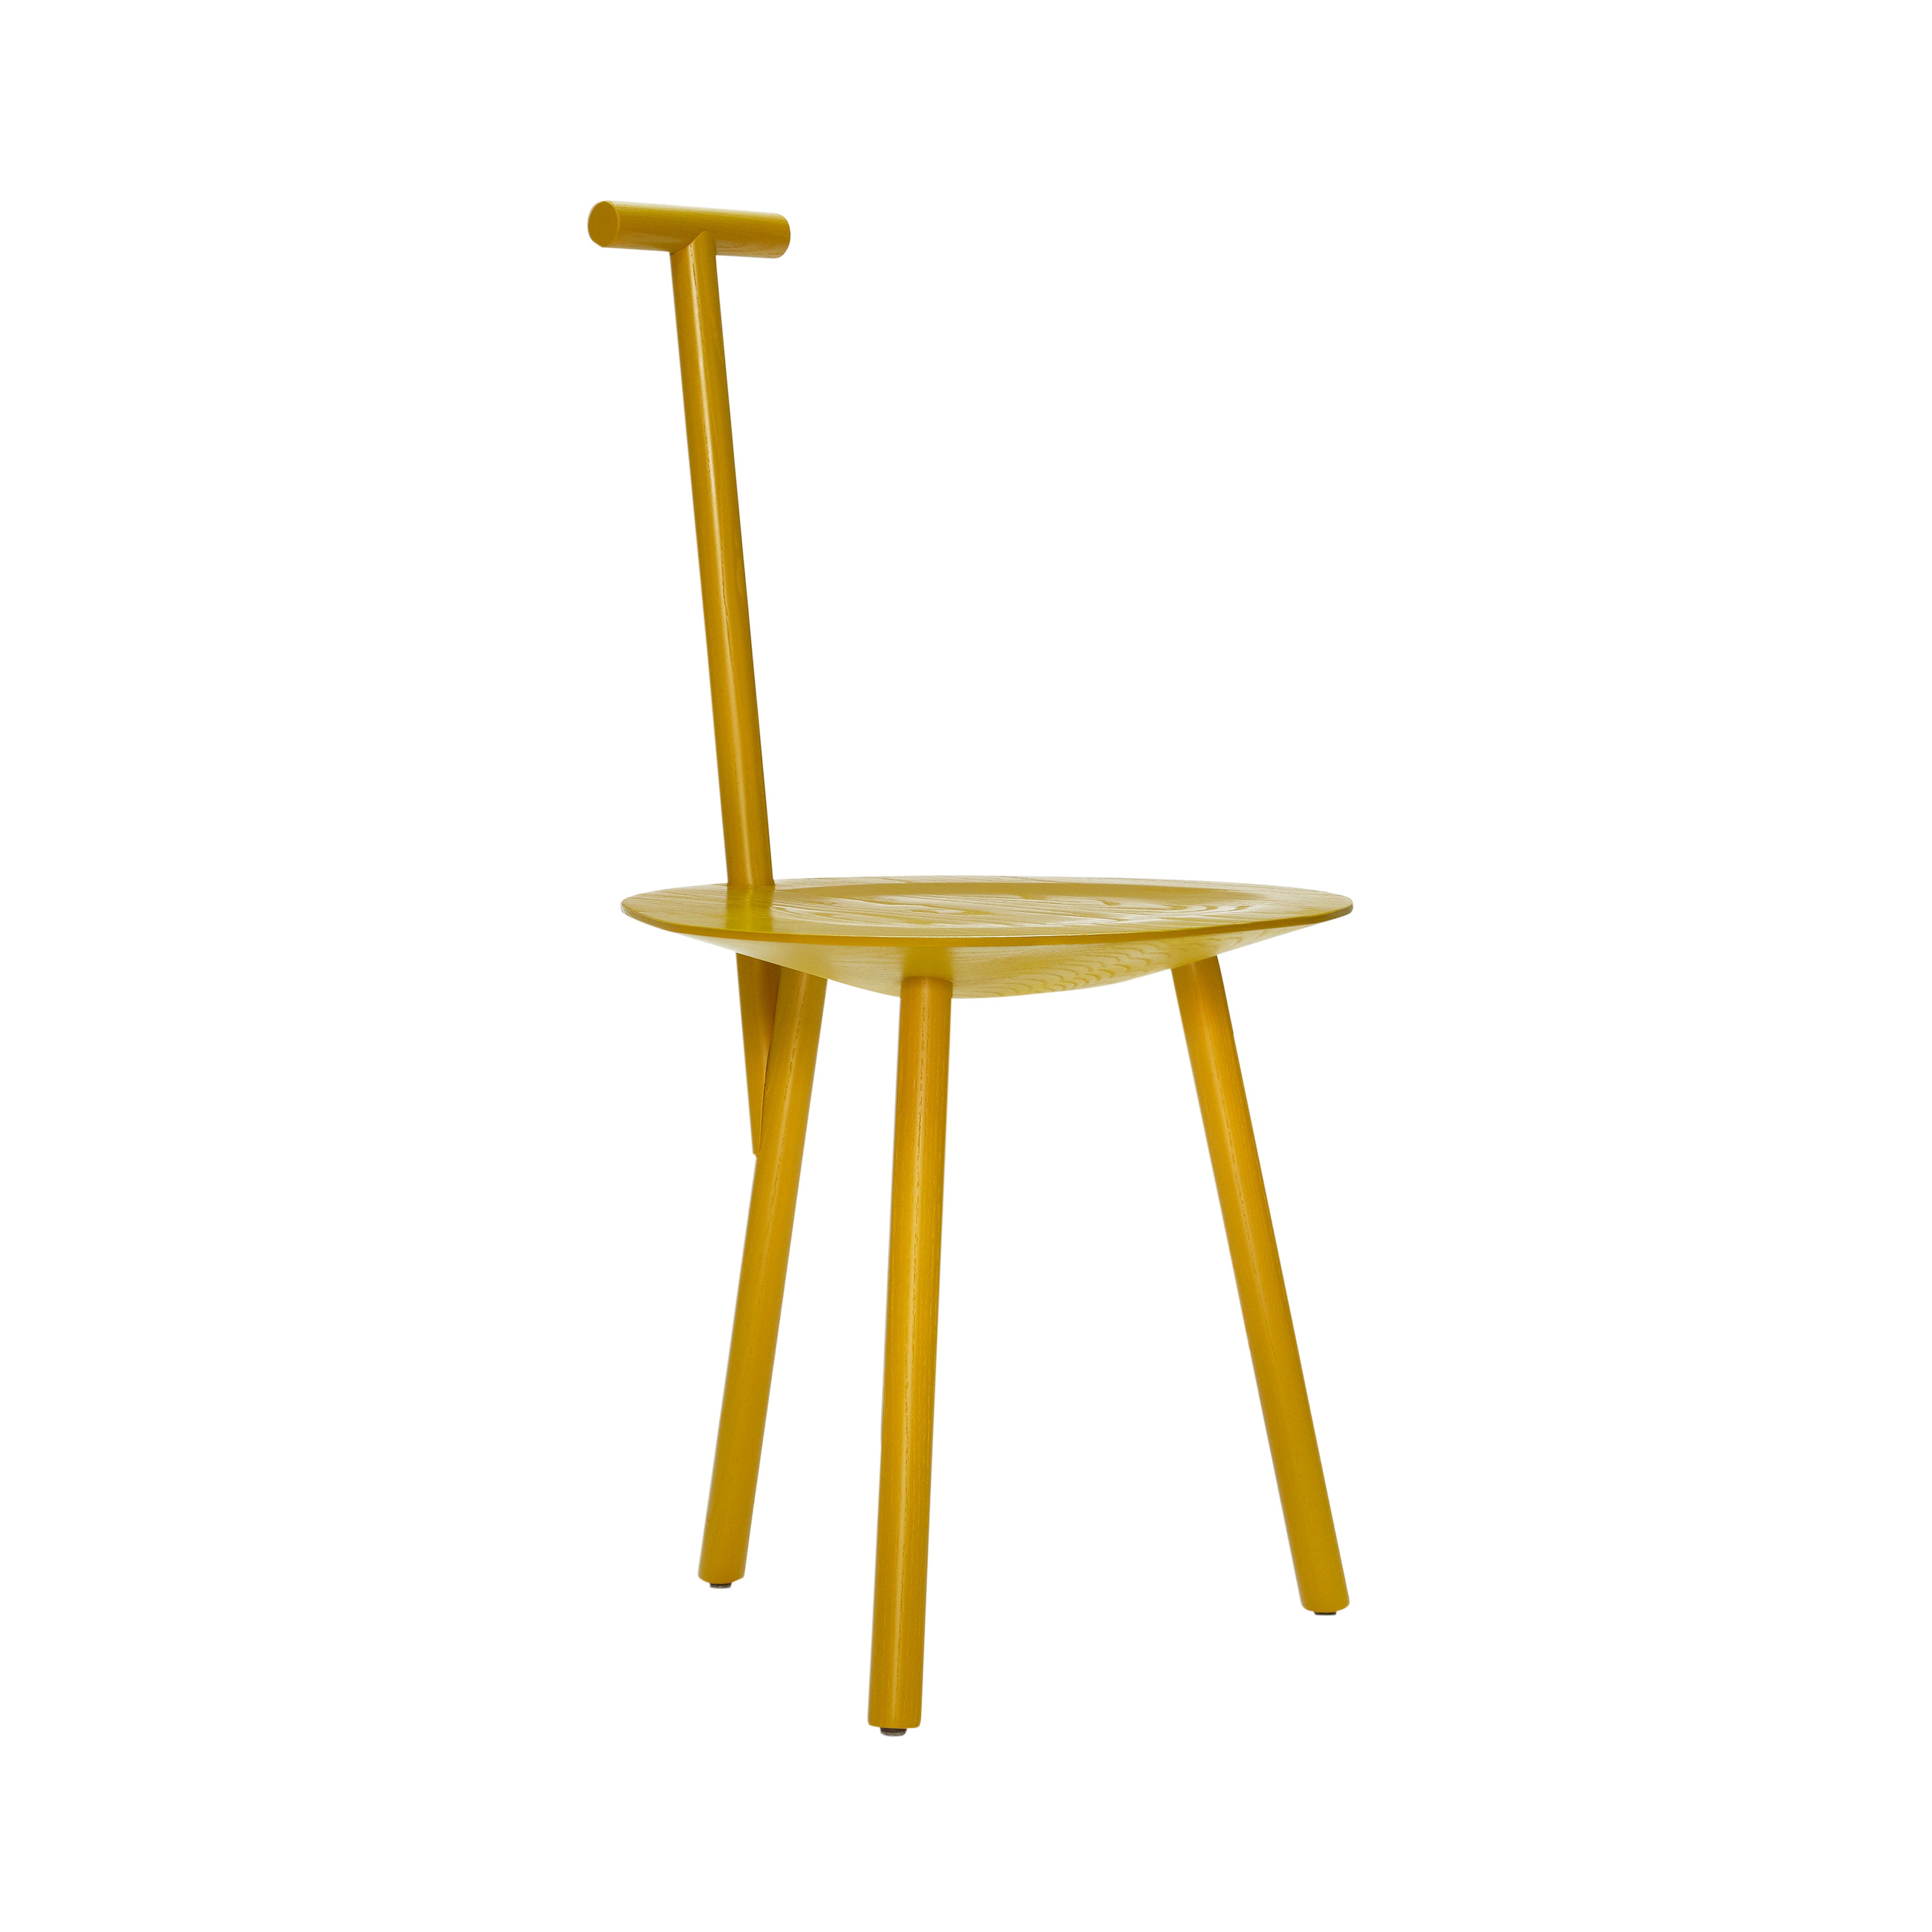 Spade Chair: Stained Turmeric Yellow